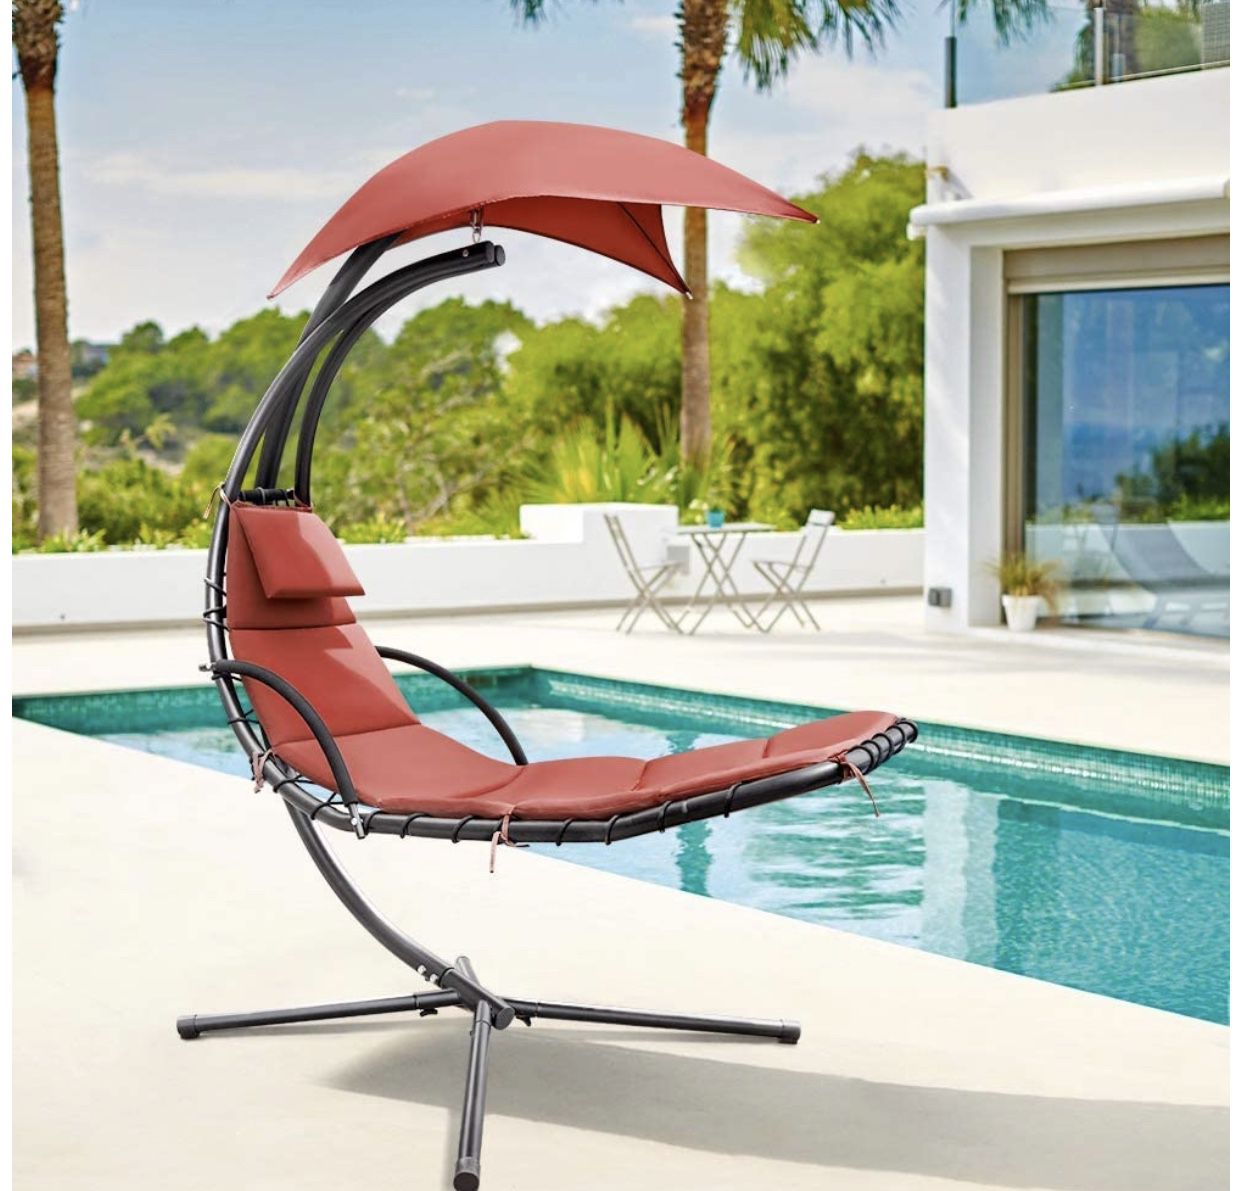 Shipping Only - Hammock Lounge Chair Outdoor Hanging Chaise Lounge Swing Chair Canopy Umbrella Sun Shade Free Standing Floating Bed Furniture for Bac